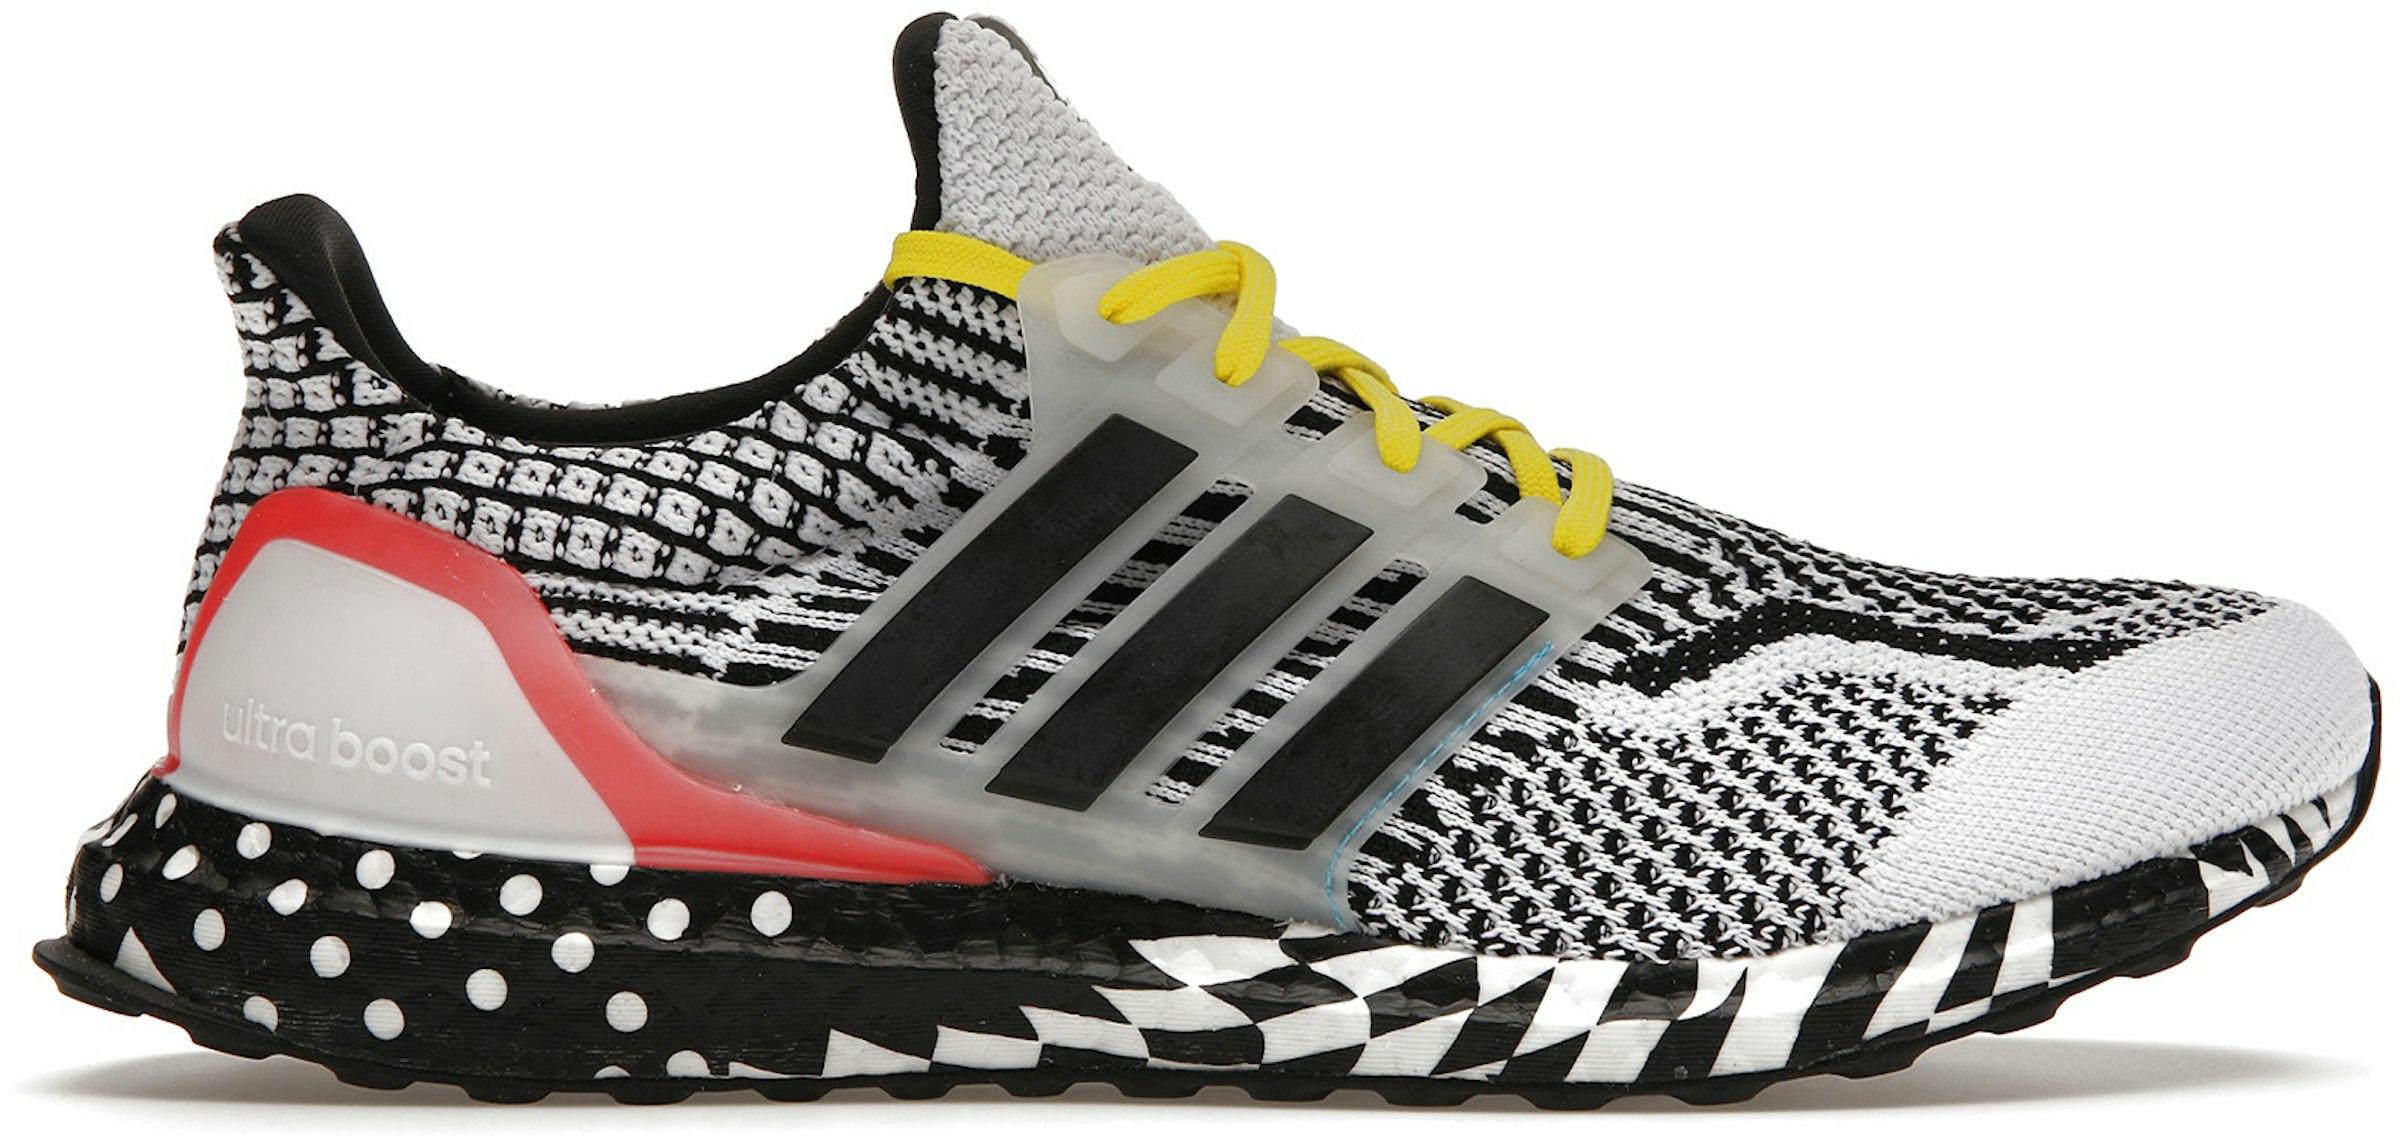 adidas Boost 5.0 DNA Multi Patern Turbo Men's - GY0326 - US